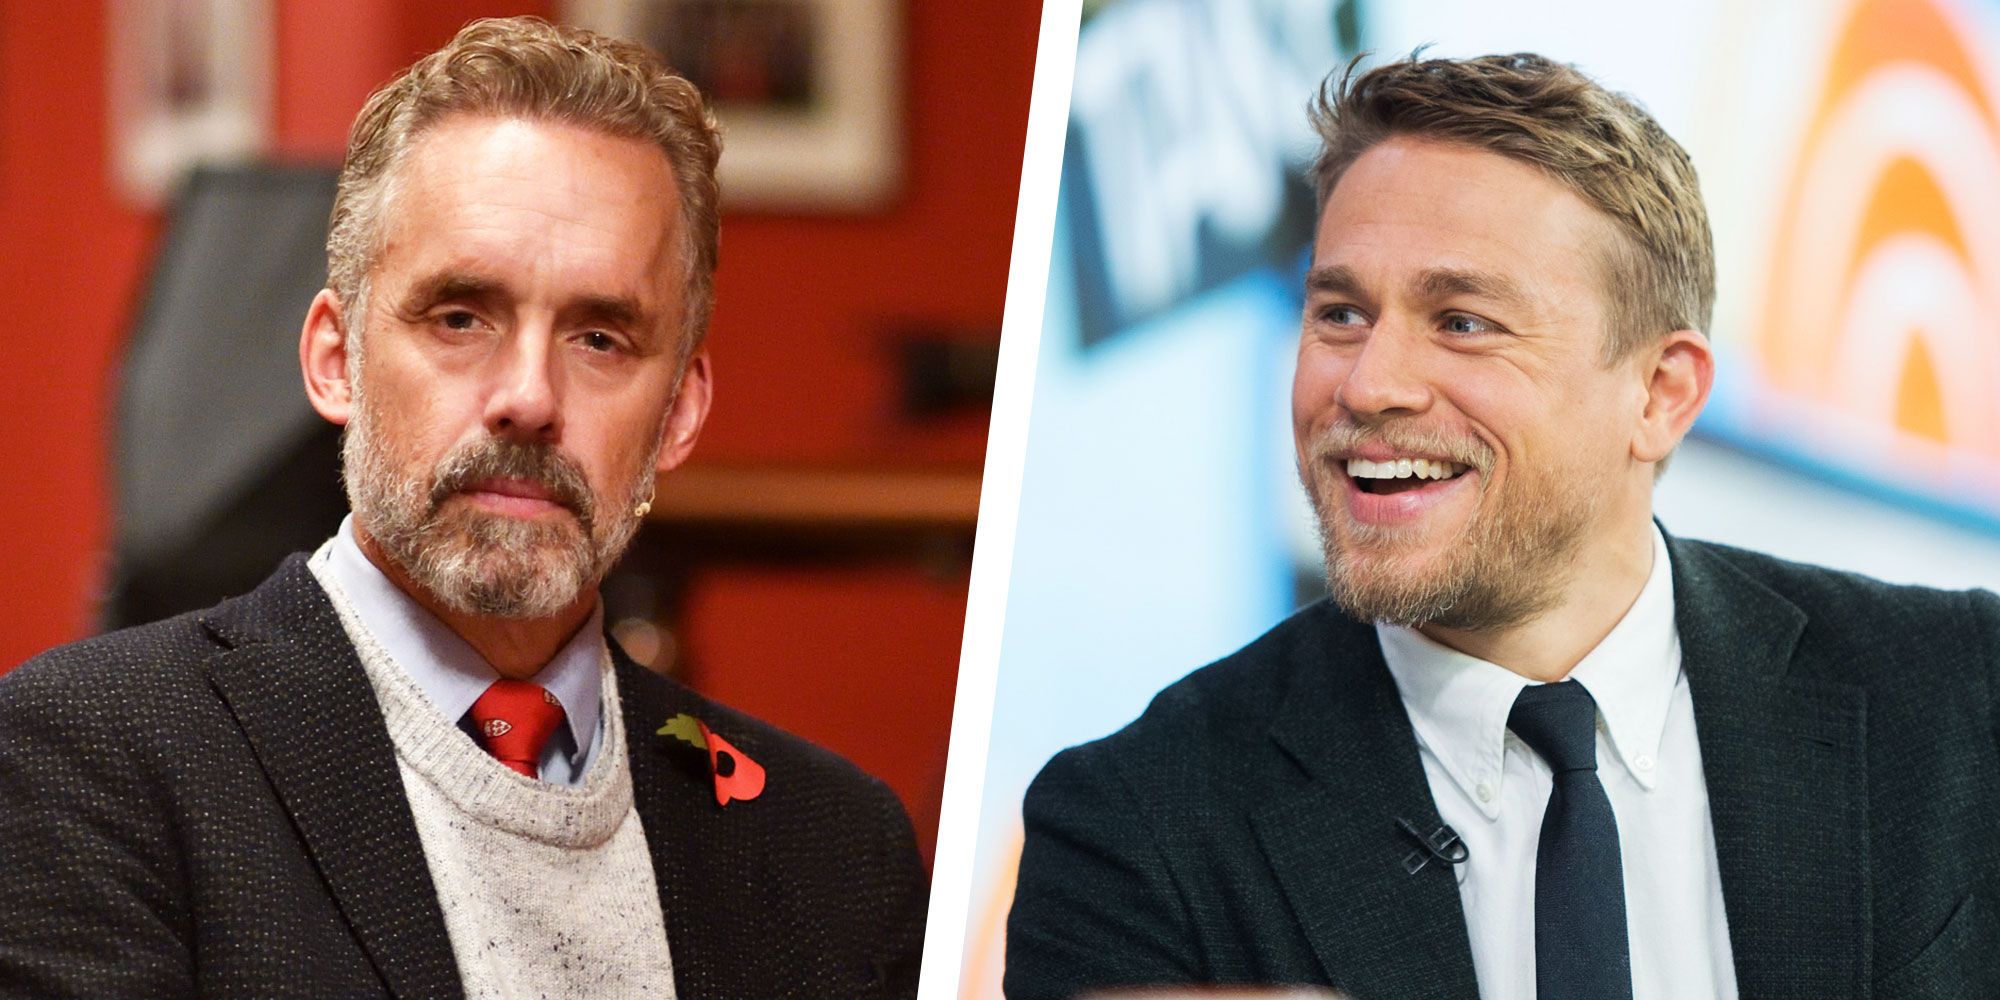 Charlie Hunnam Faces Backlash for Saying He's a 'Big Fan' Jordan Peterson